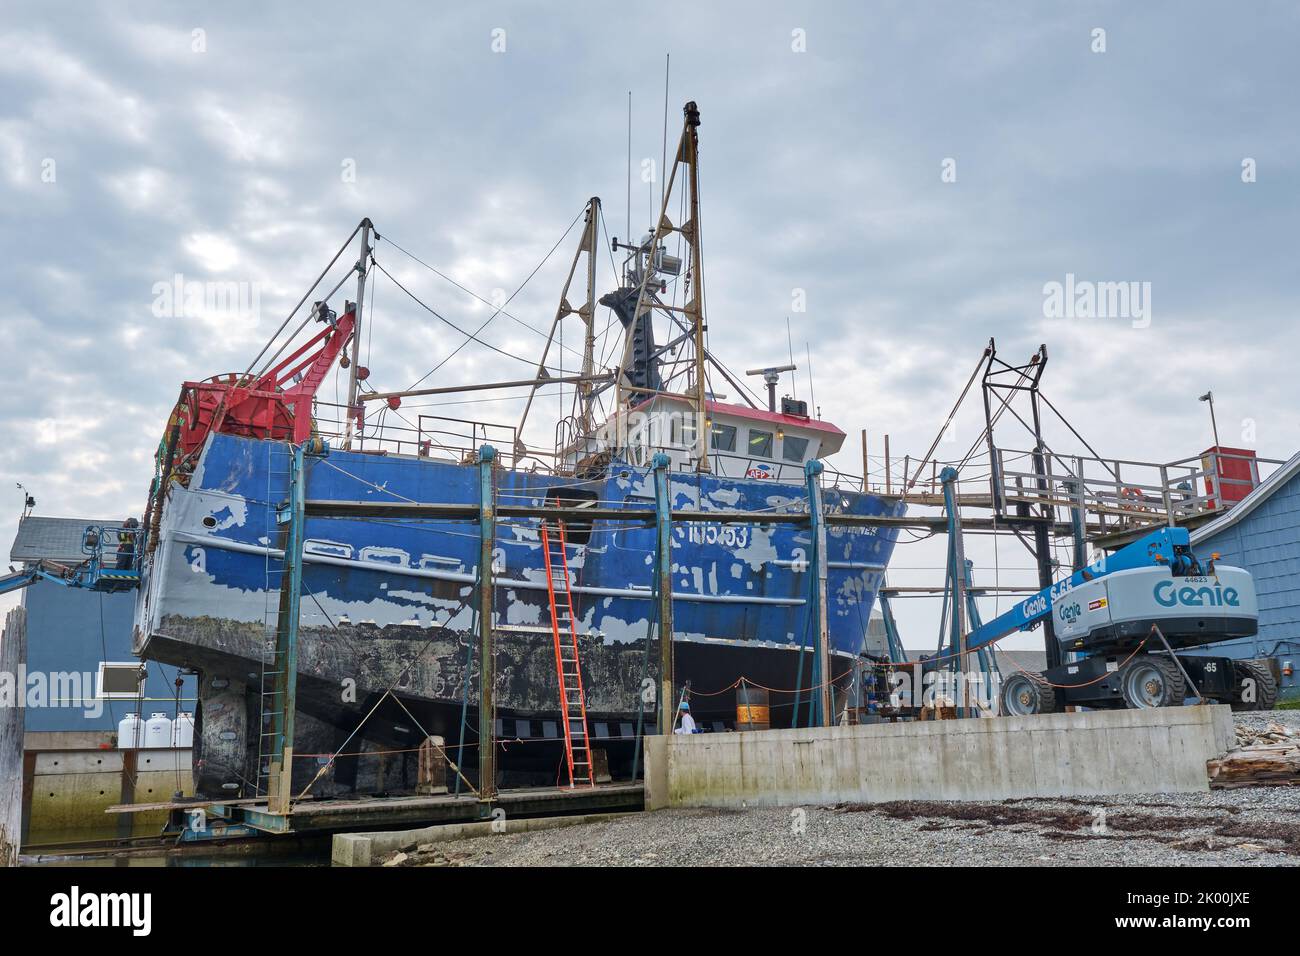 Fishing boat in drydock being repaired and retrofitted in Meteghan Nova Scotia. Stock Photo